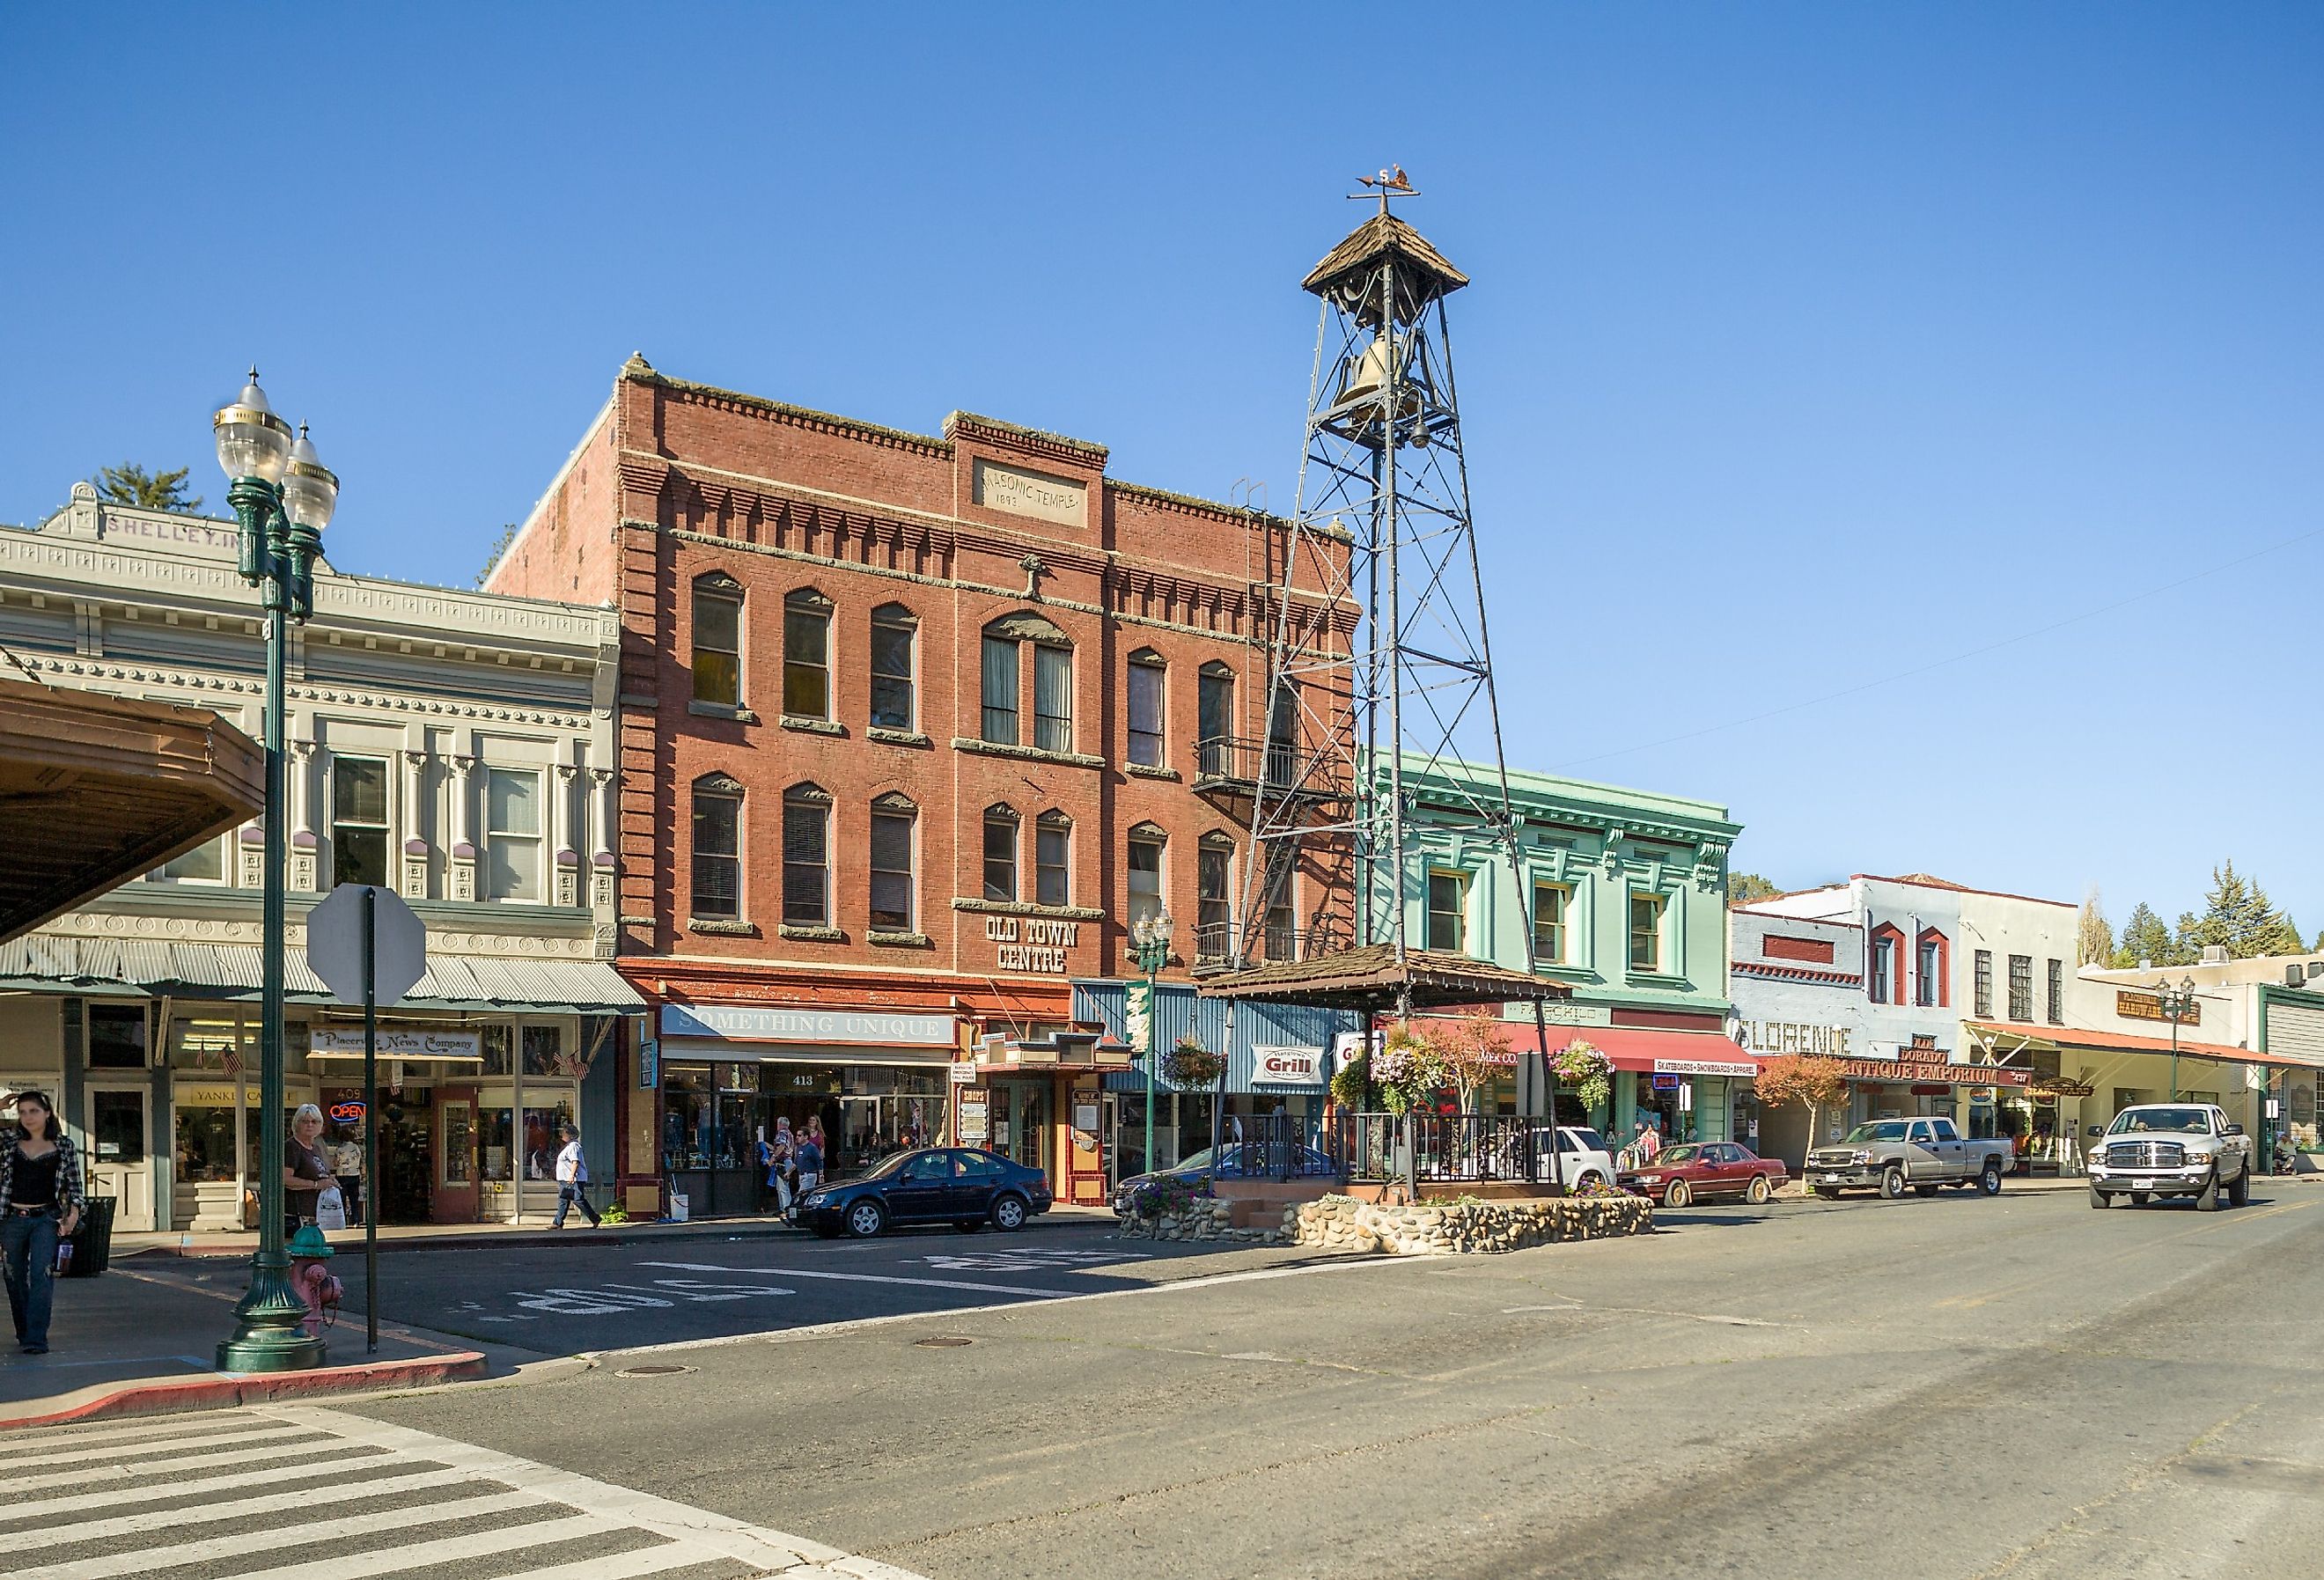 Historic Bell Tower Monument and Old Town Centre in Placerville, California. Image credit Laurens Hoddenbagh via Shutterstock